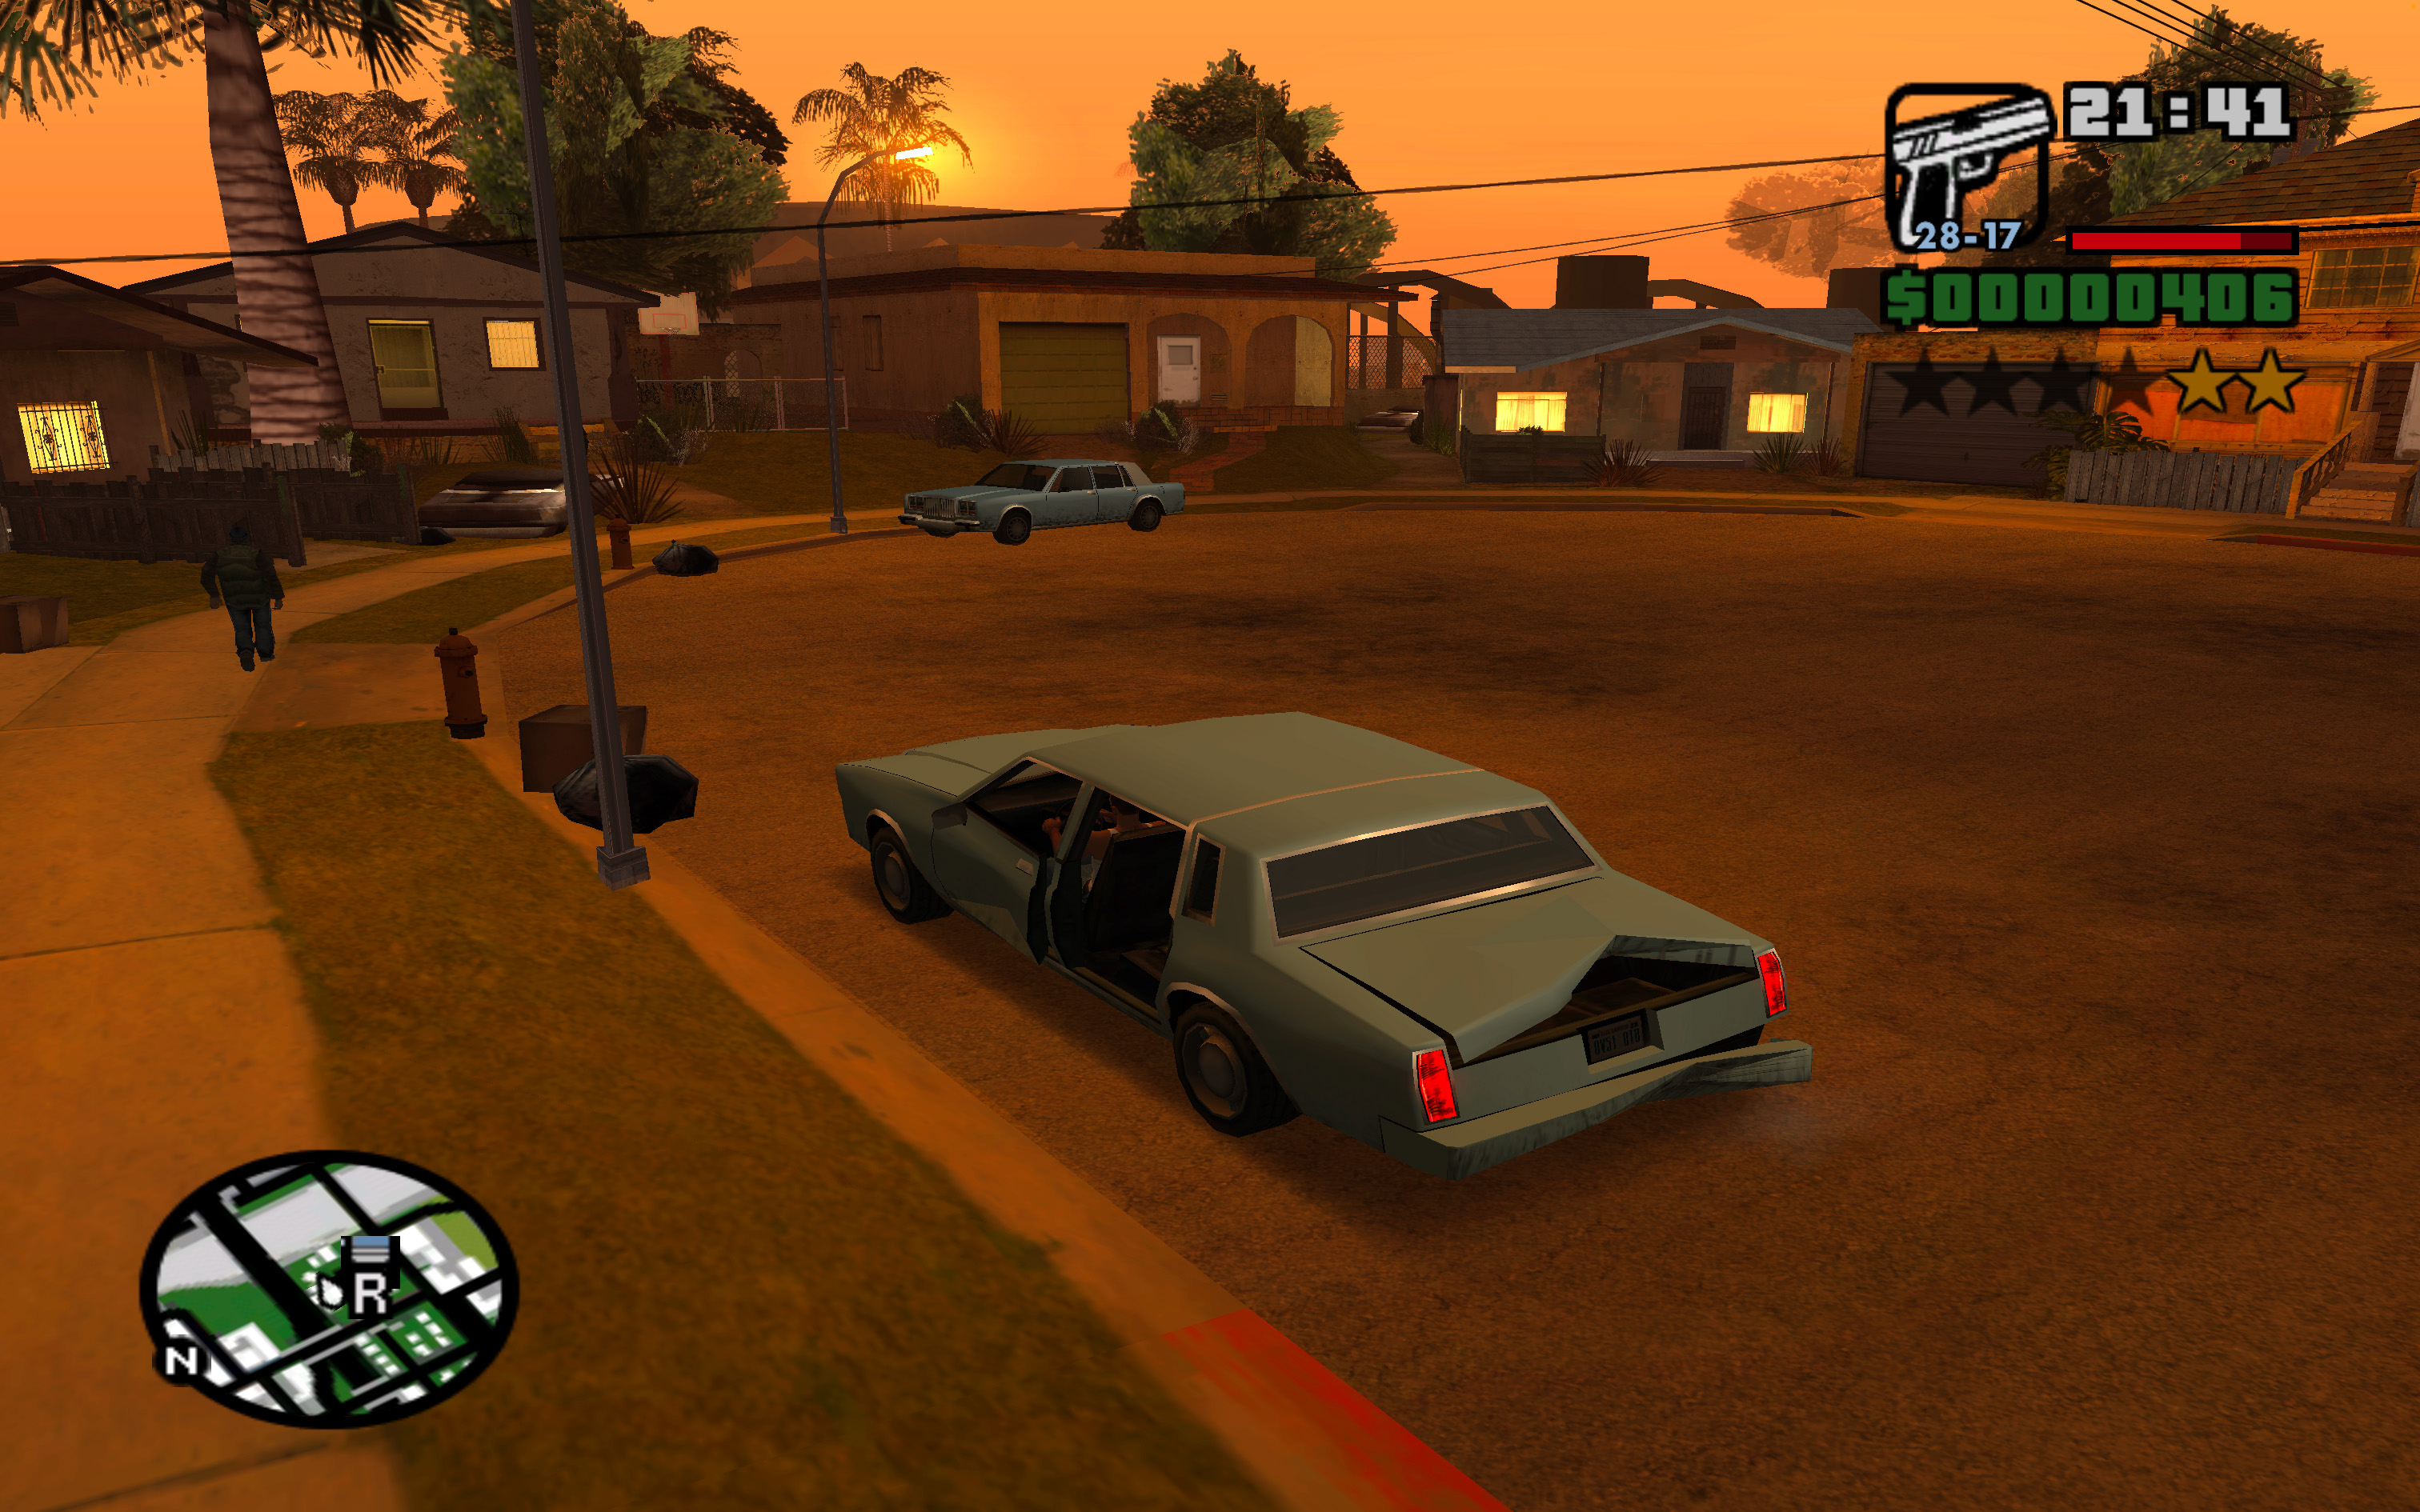 Grand Theft Auto: San Andreas Download for Free - 2023 Latest Version